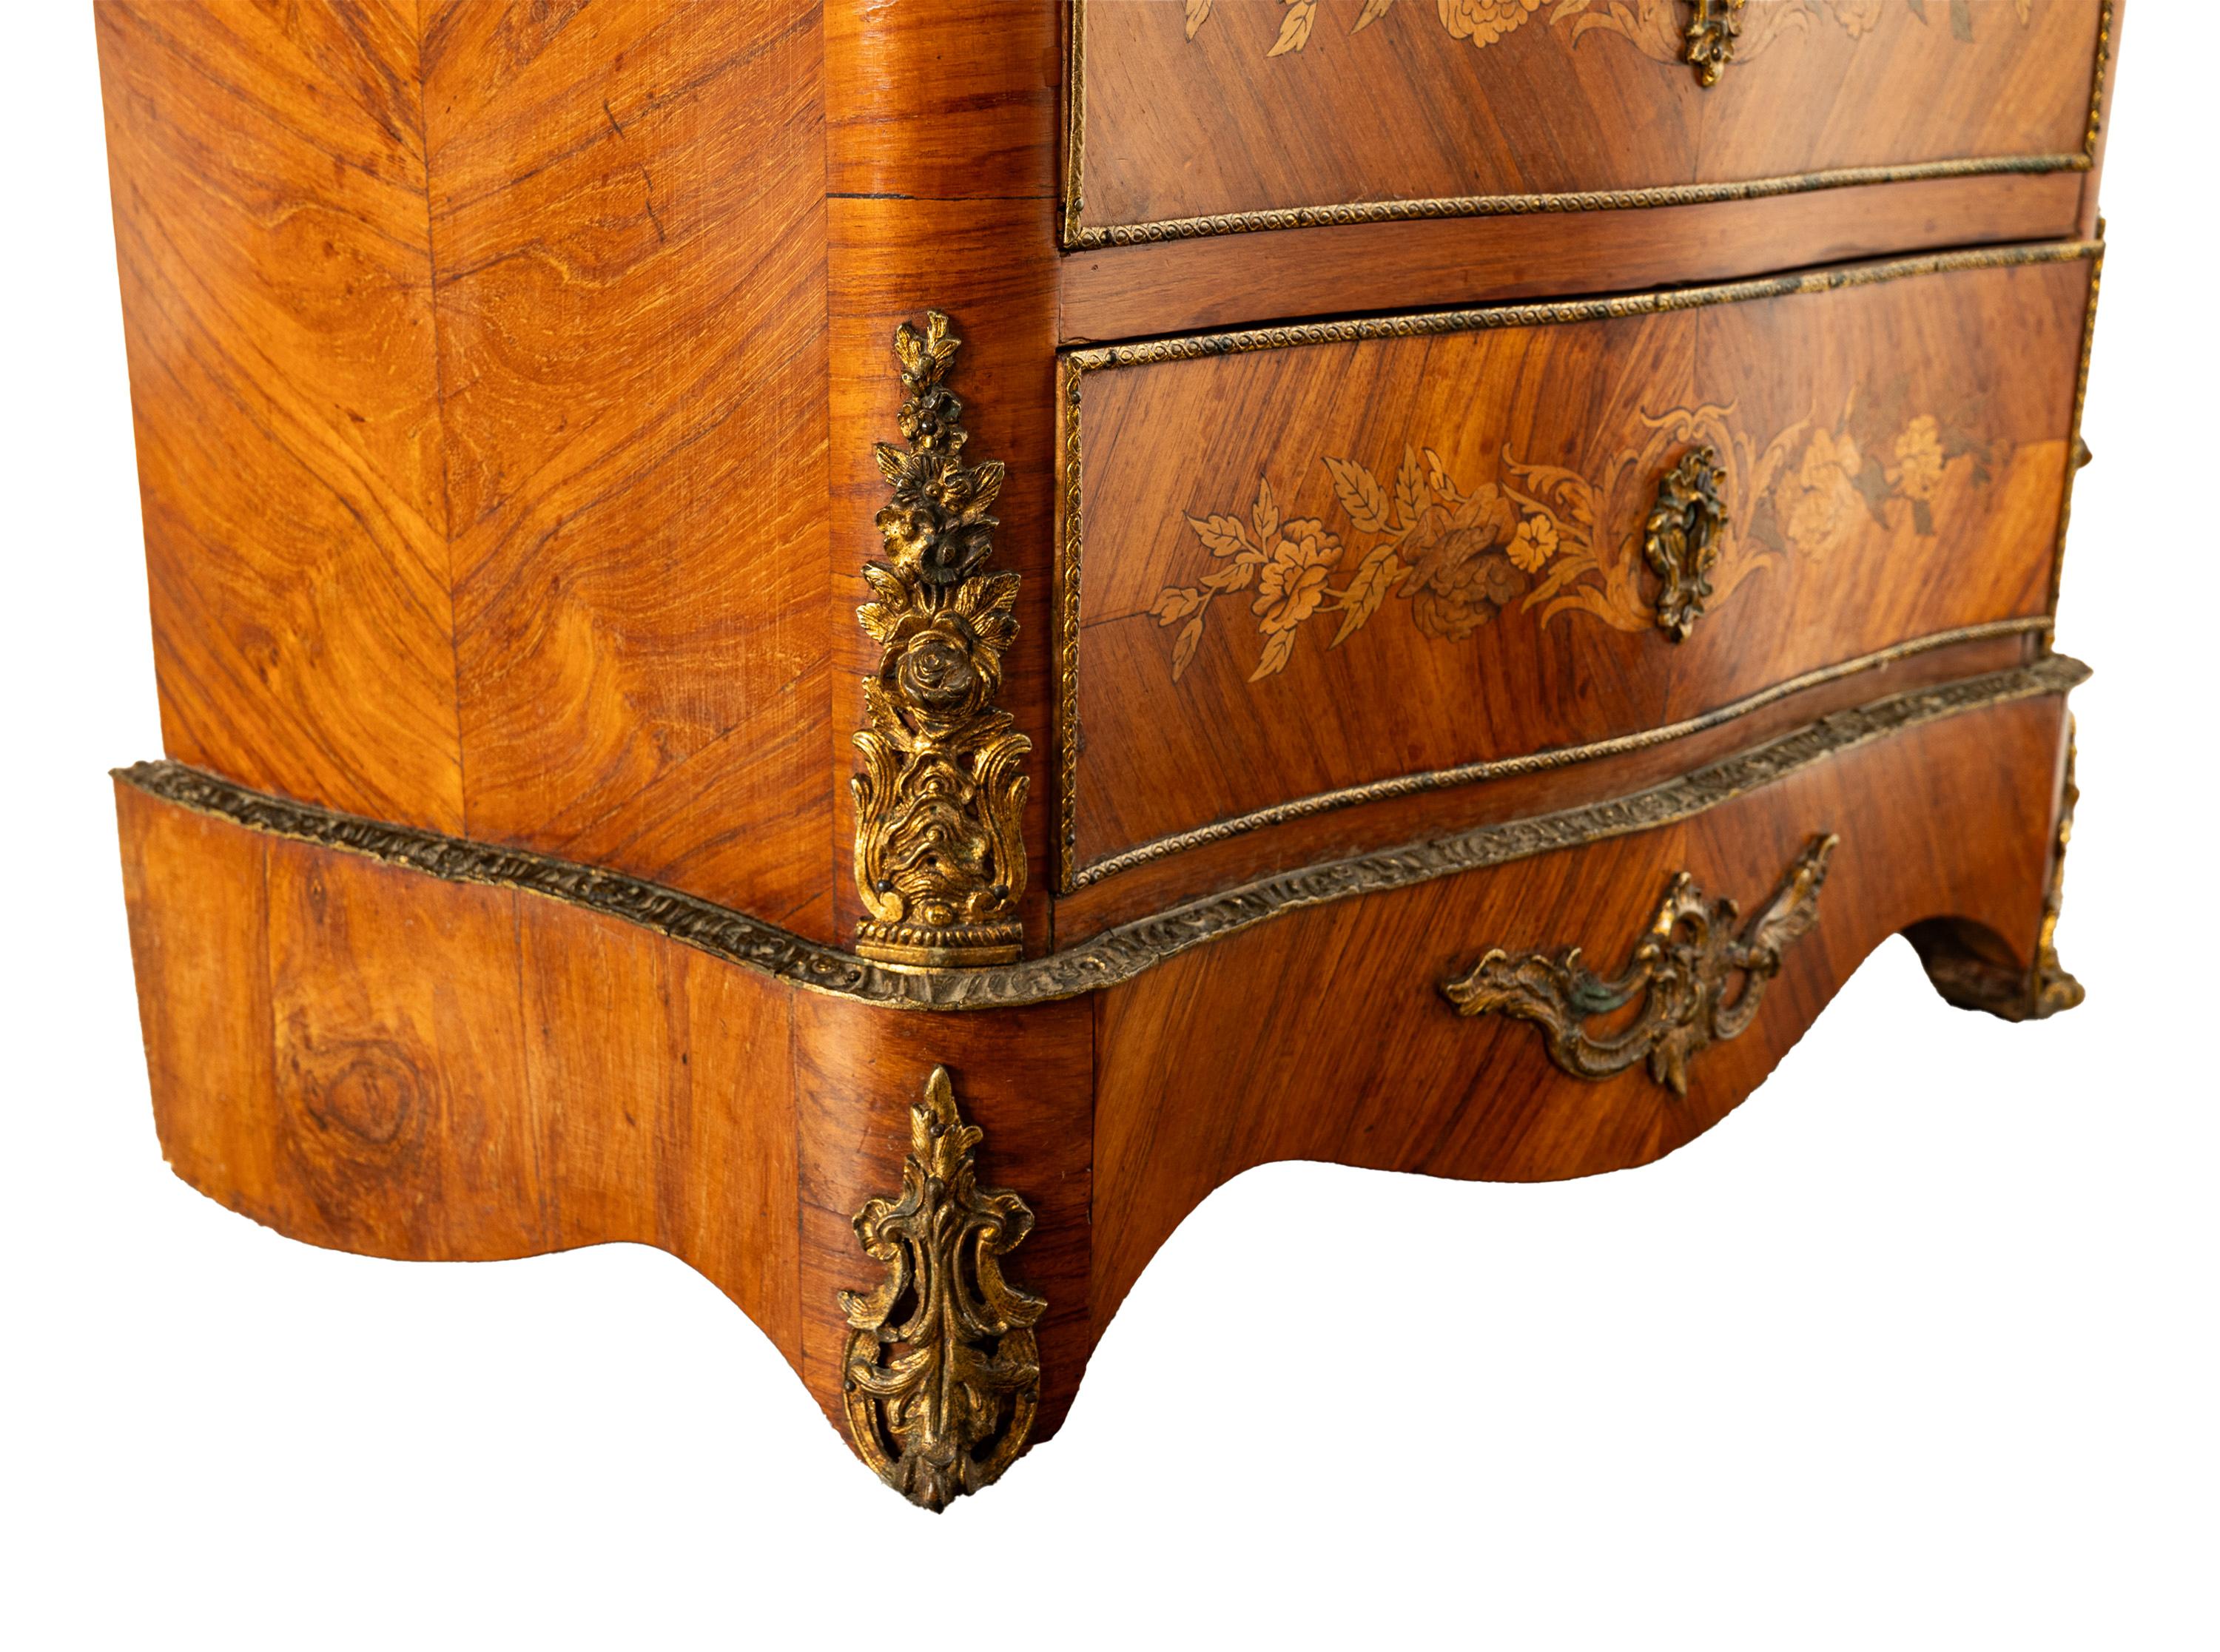 Fine Antique French Louis XV Marquetry Rosewood Ormolu Secretaire Abattant 1880 For Sale 13